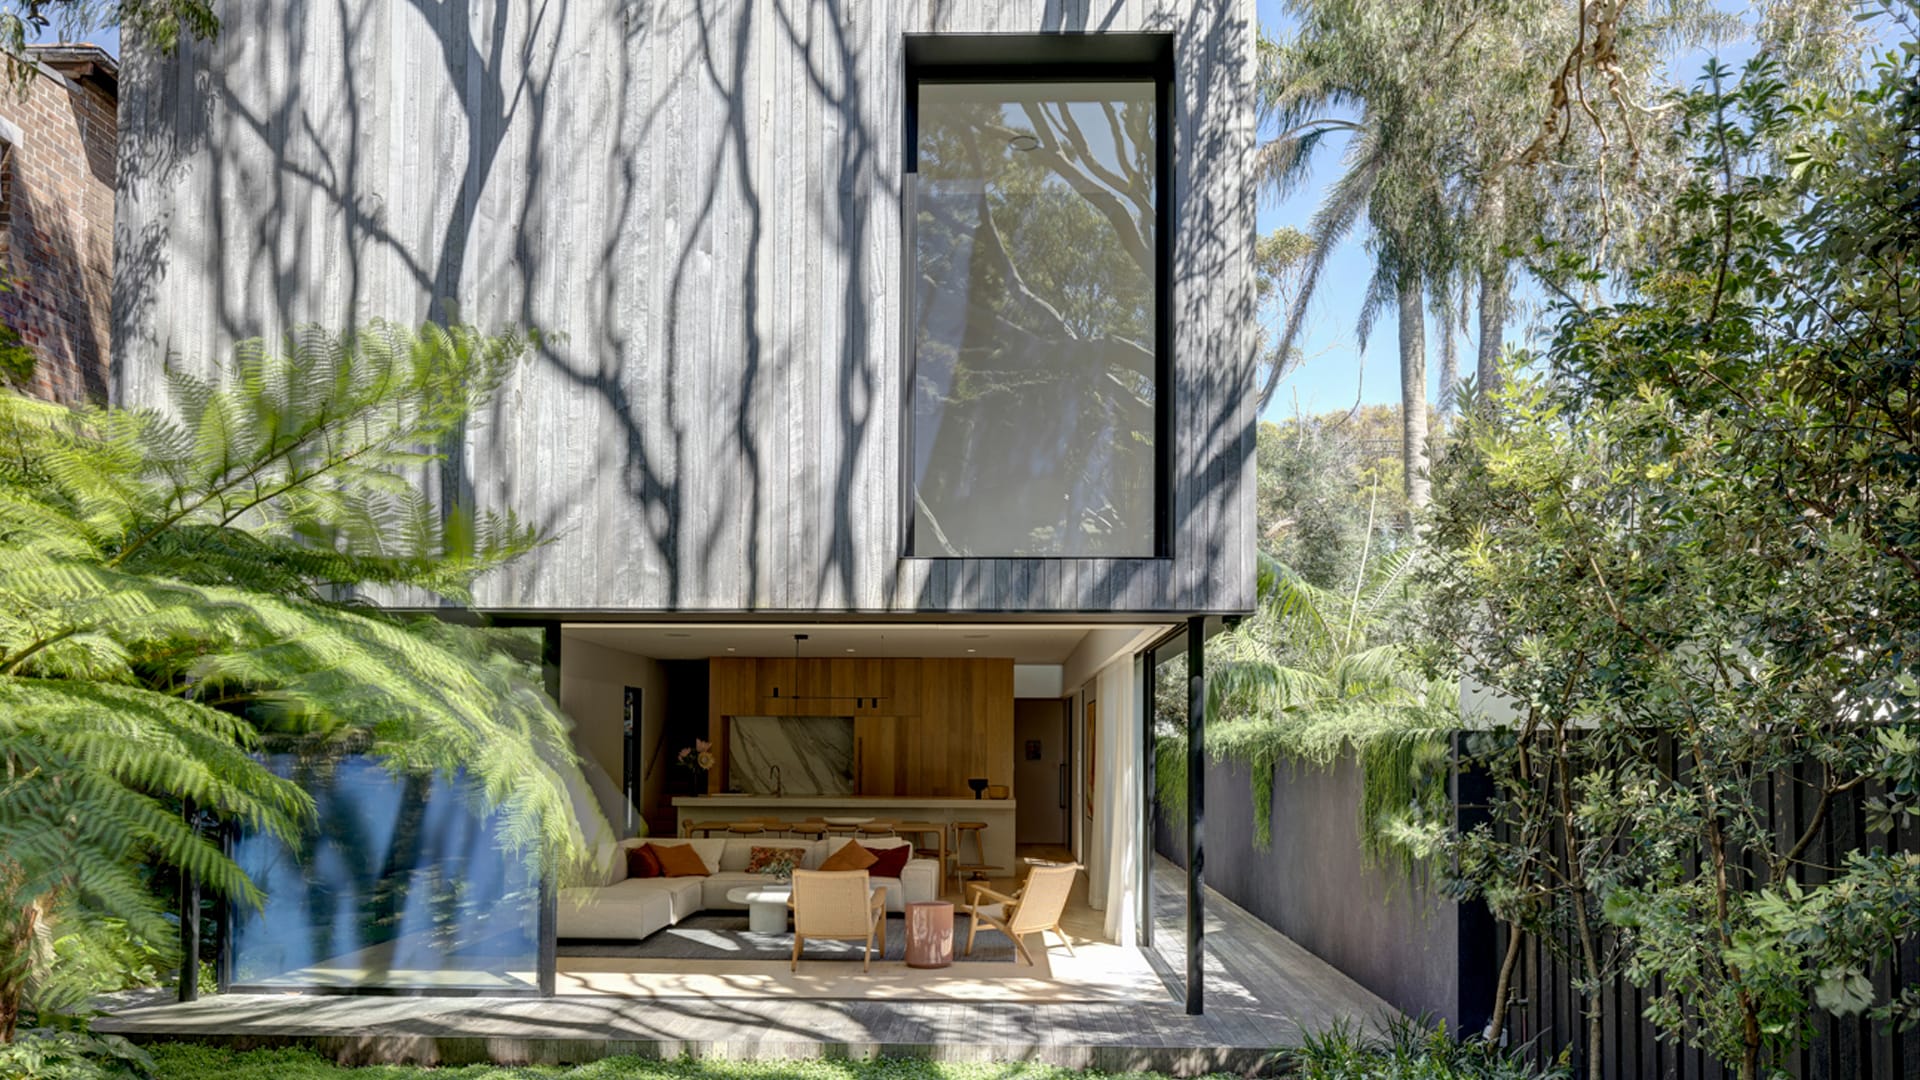 Quarry Box by MCK Architects. Photography by Brett Boardman. Ladnscape image of rear facade of home with large opening on ground floor onto timber deck, lush garden and open plan living. Exterior clad in aged timber with large black framed window on second floor. 